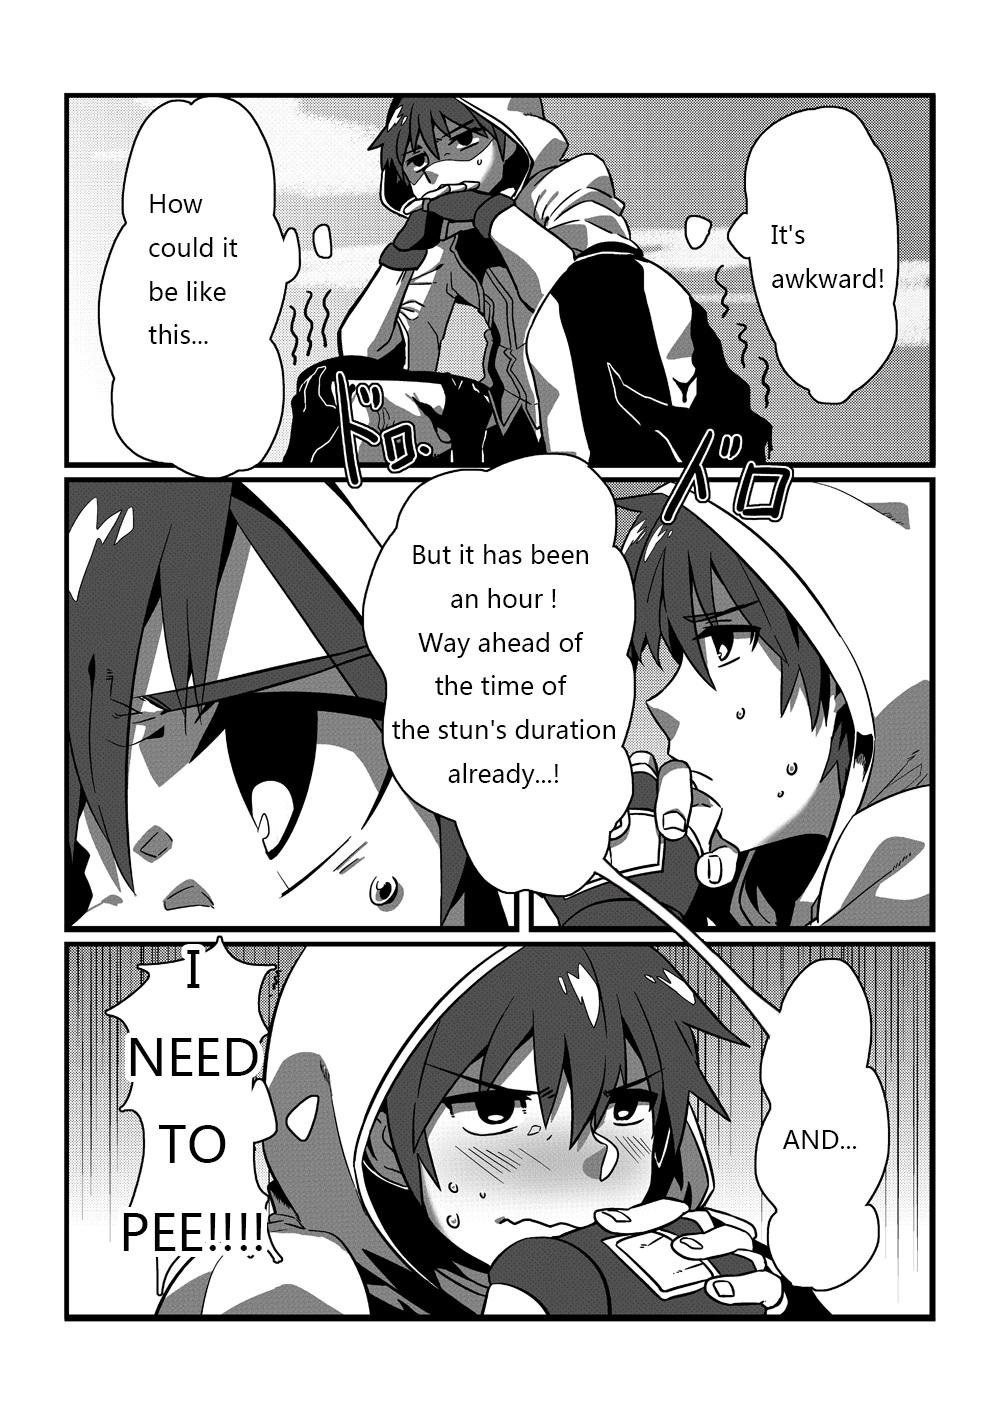 Cartoon Shintou - PENETRATION - Dungeon fighter online Spanking - Page 5